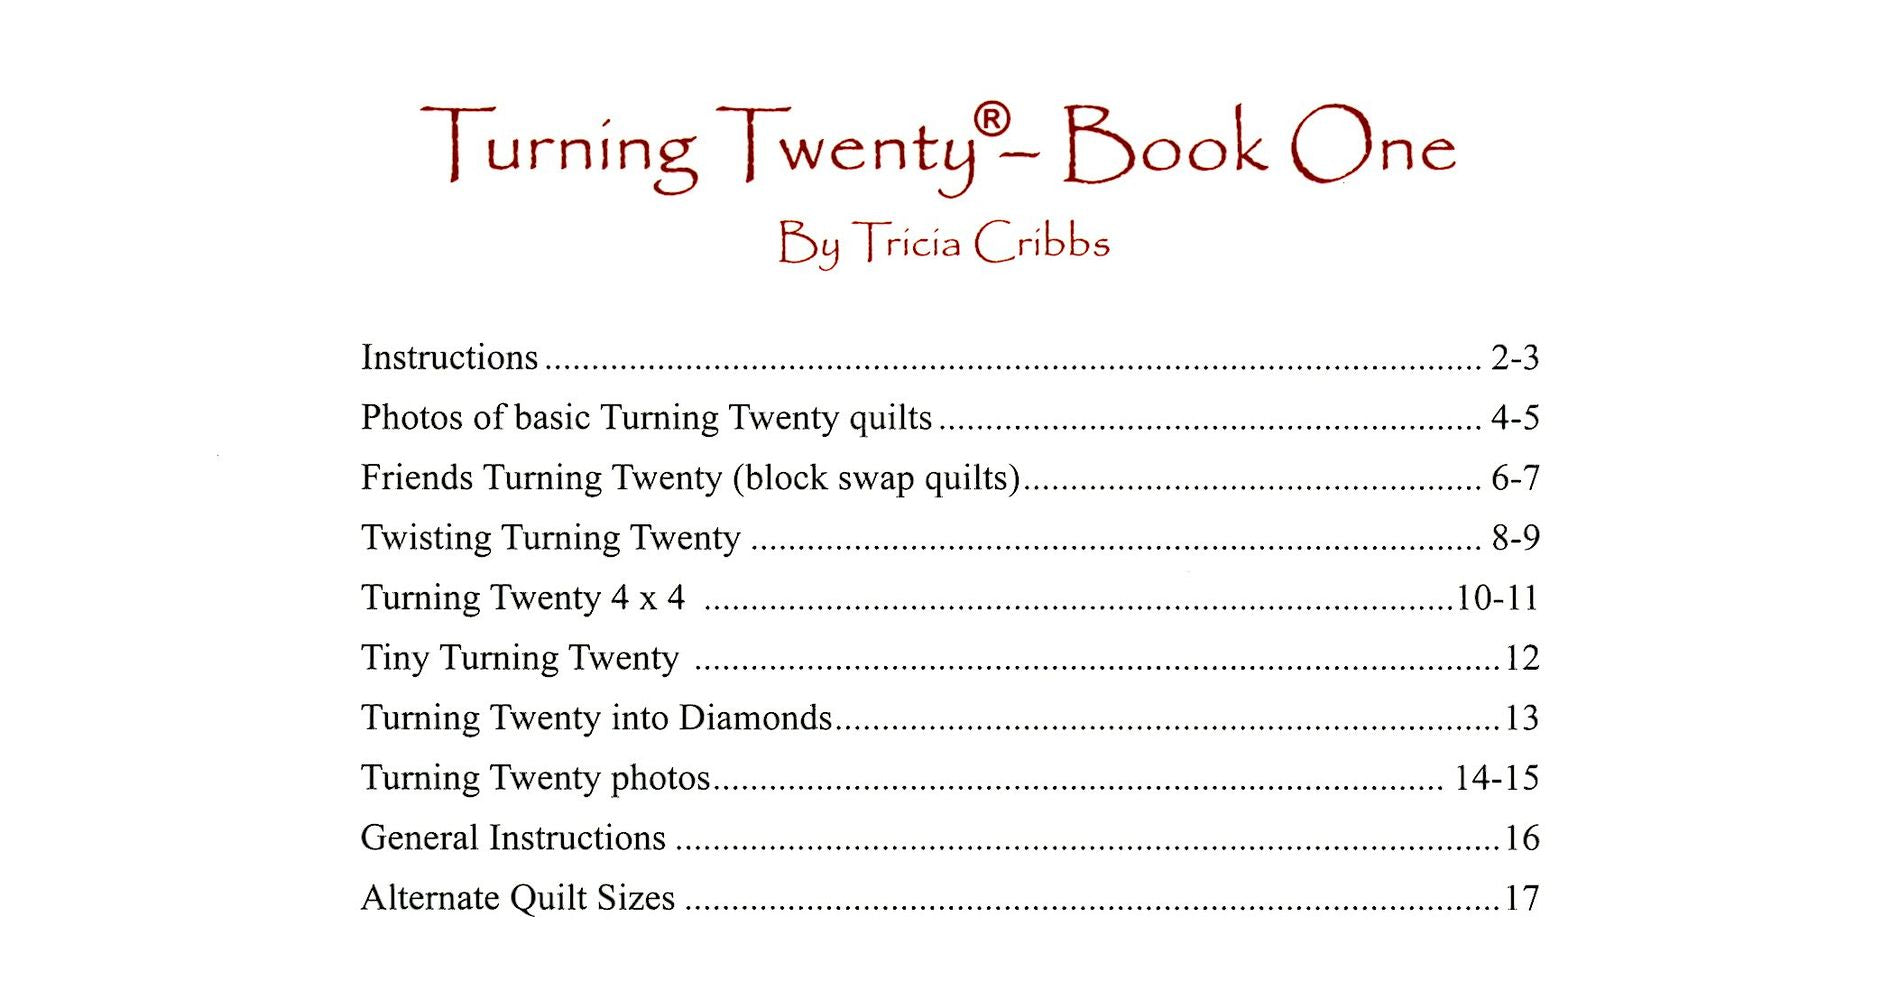 Turning Twenty Just Got Better Quilt Pattern Book by Tricia Cribbs of Friendfolks